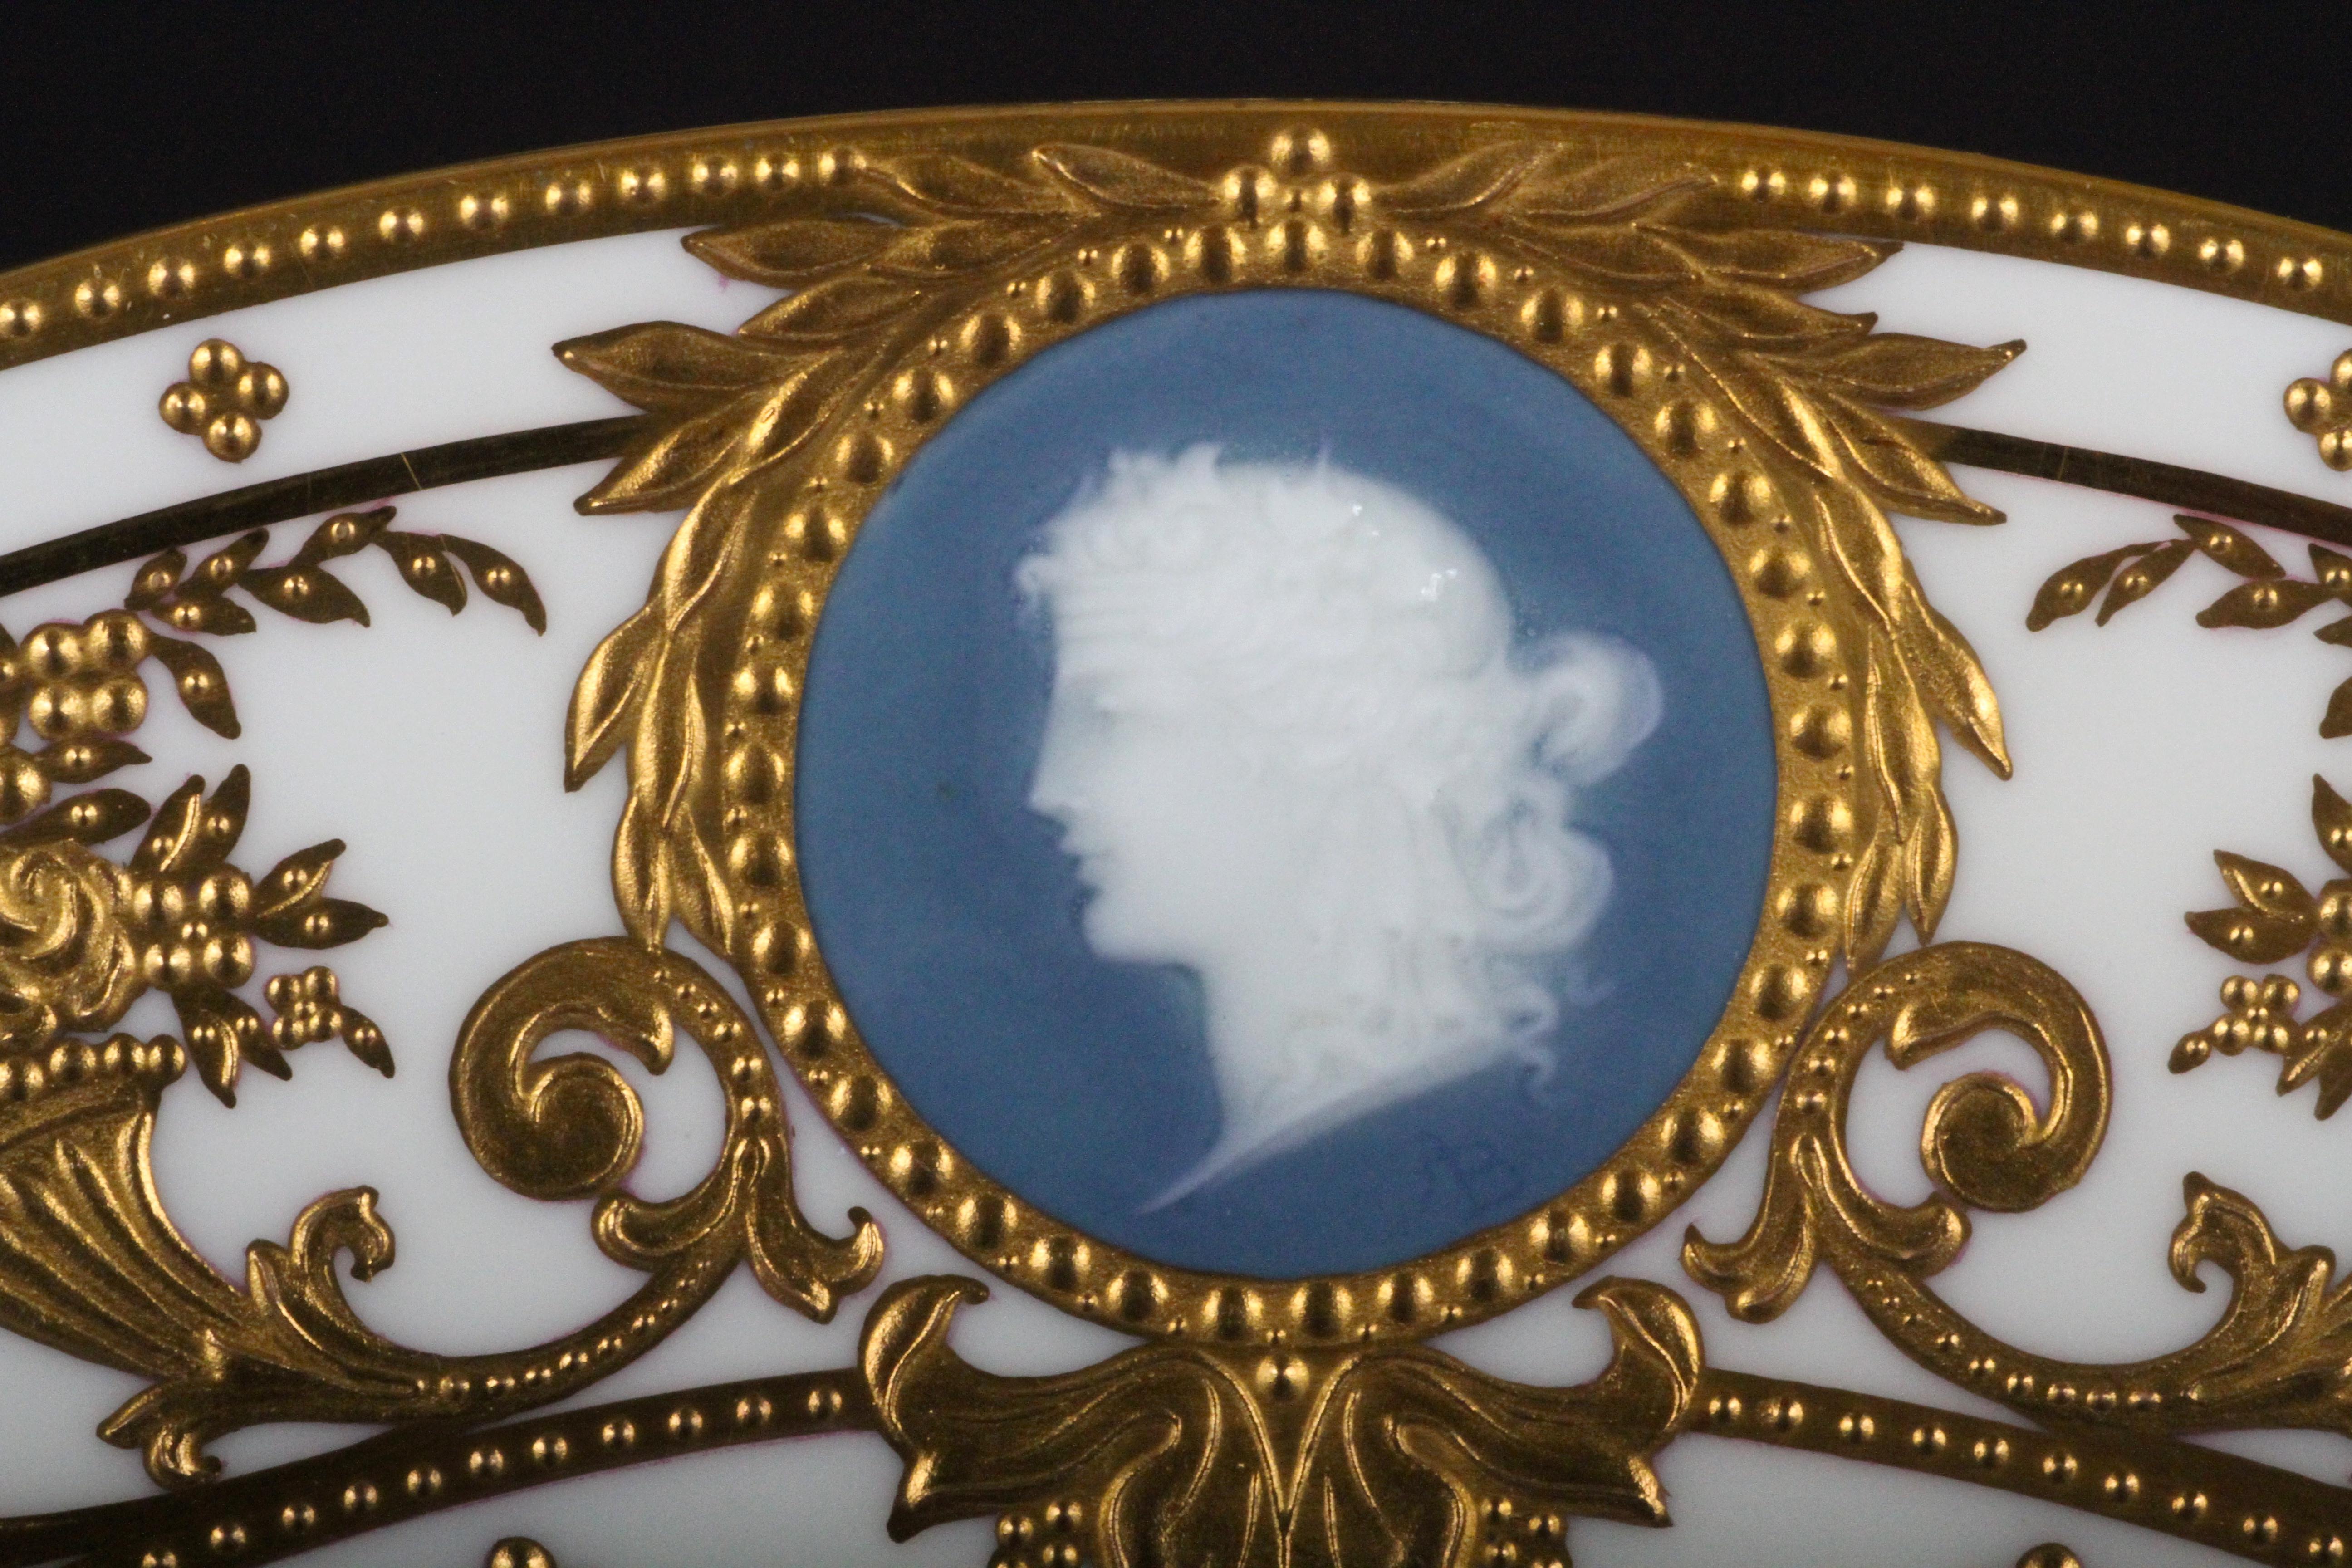 Gold Leaf 12 Minton Pate-sur-Pate Cameo Plates for Tiffany, by Artist Albion Birks For Sale